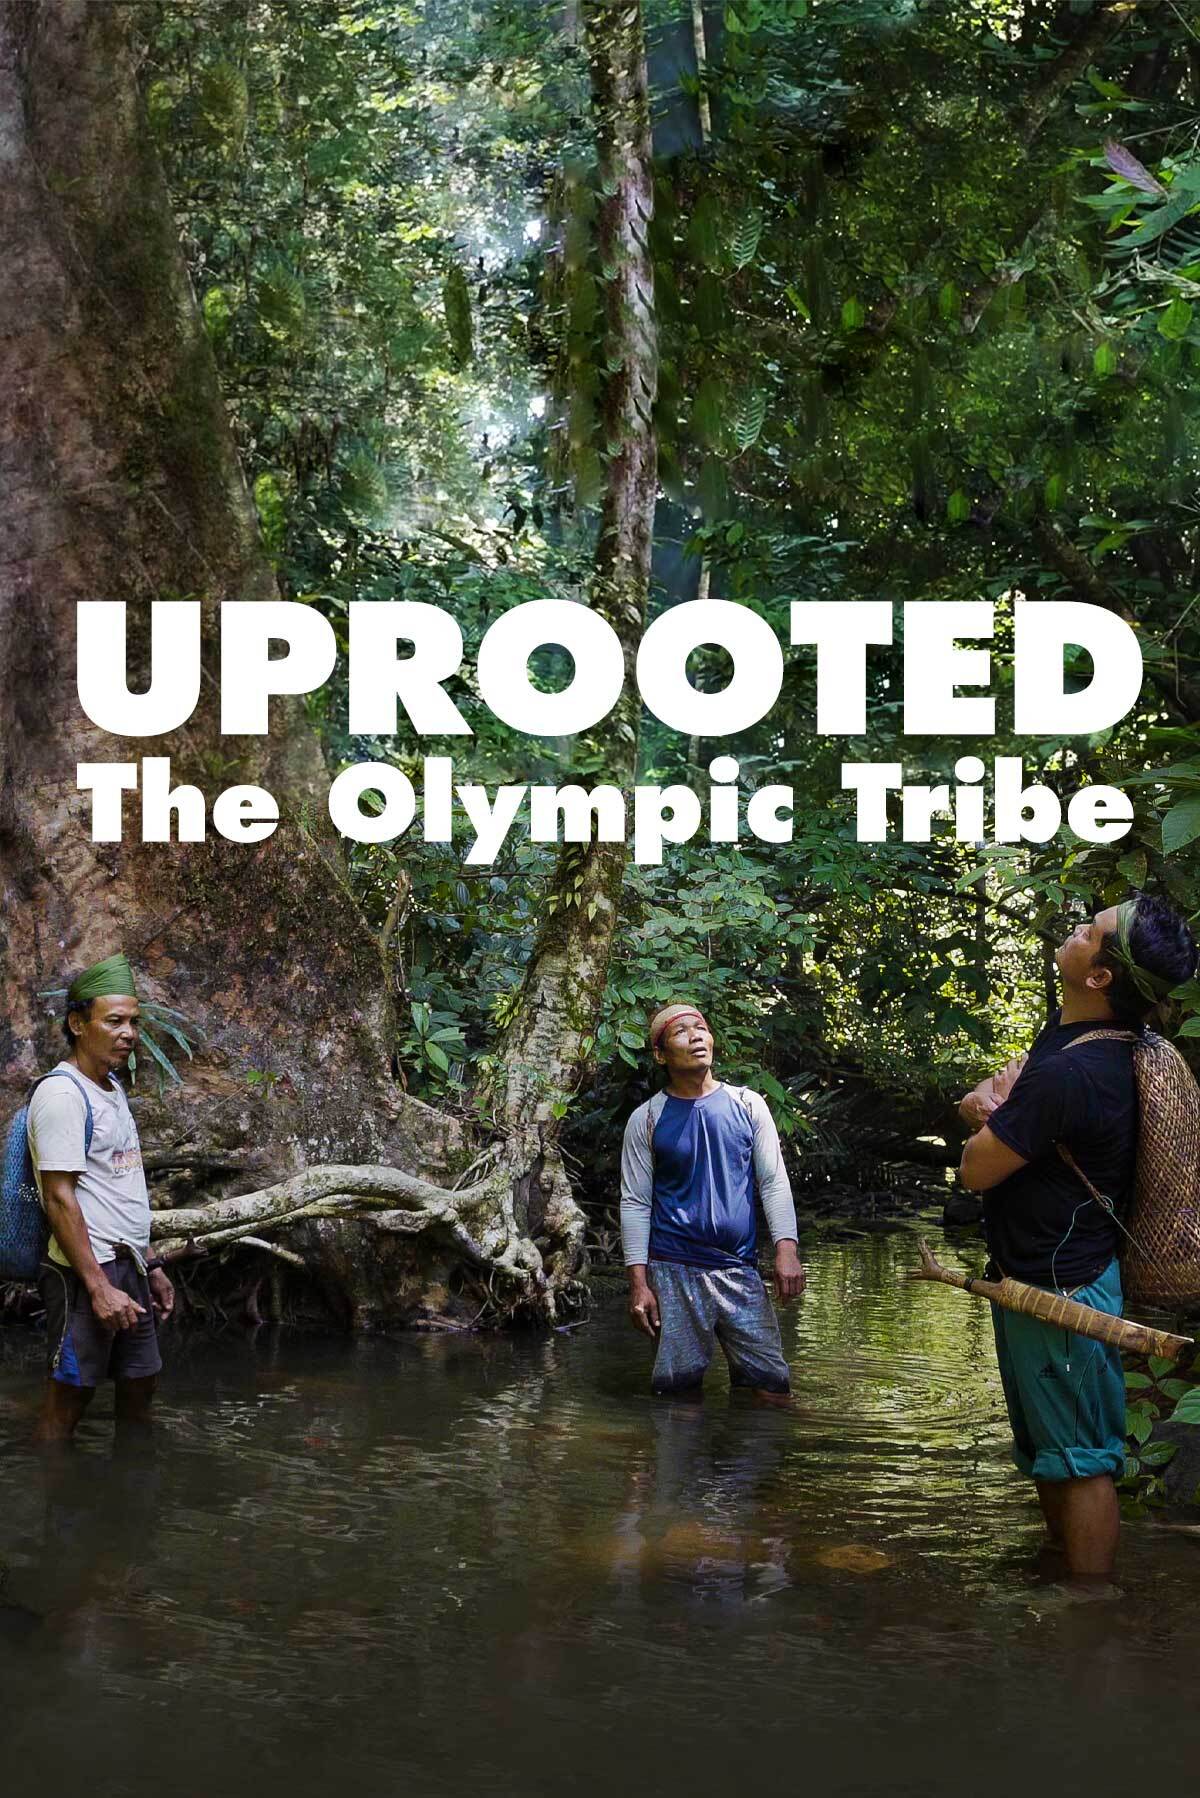 Uprooted: The Olympic Tribe